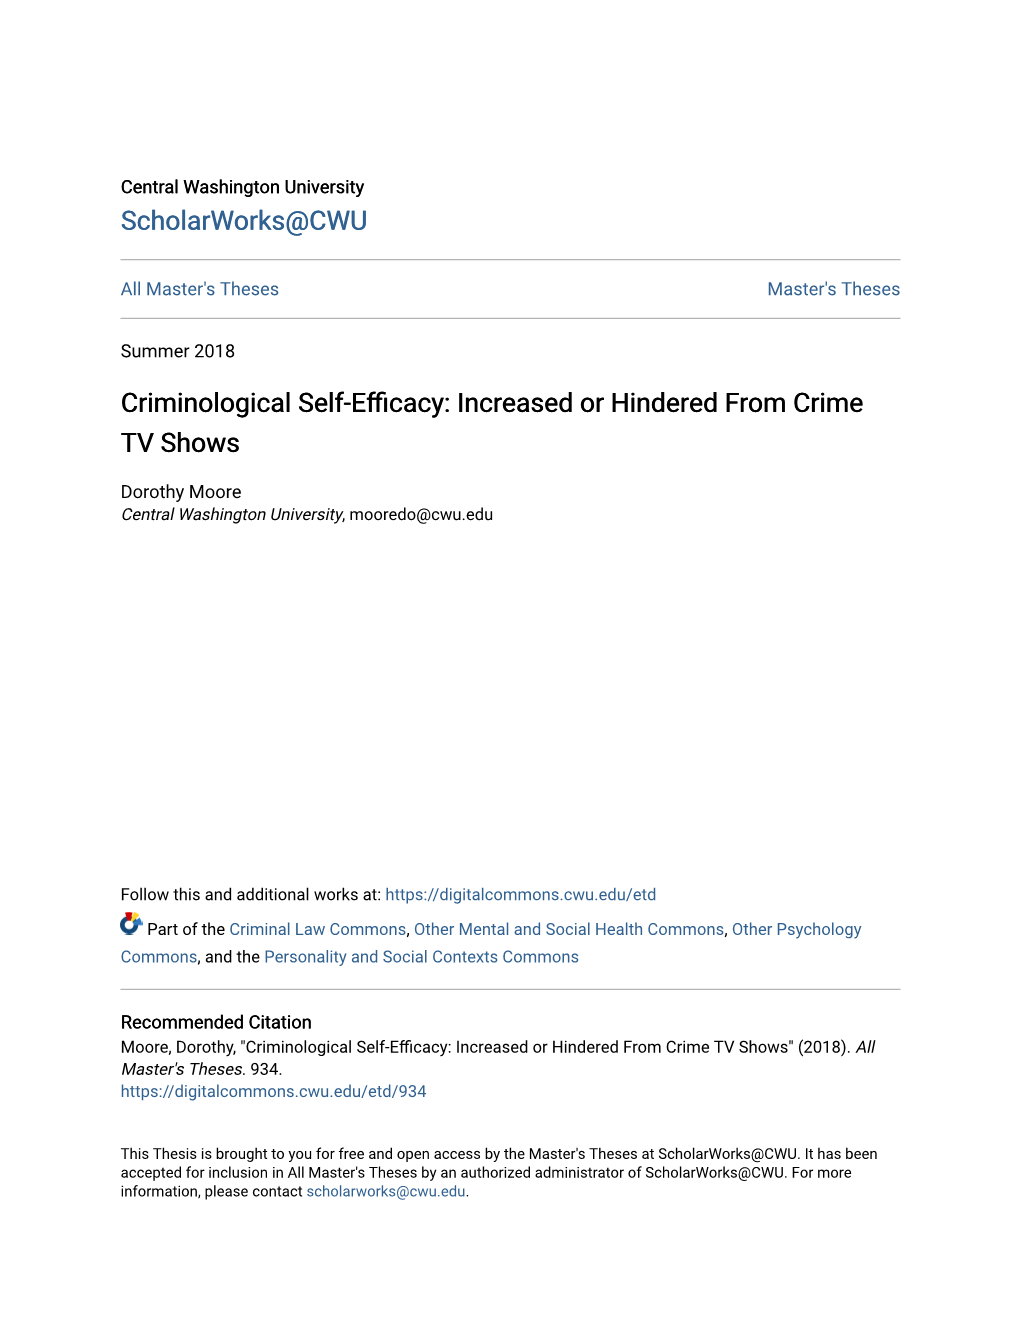 Criminological Self-Efficacy: Increased Or Hindered from Crime TV Shows